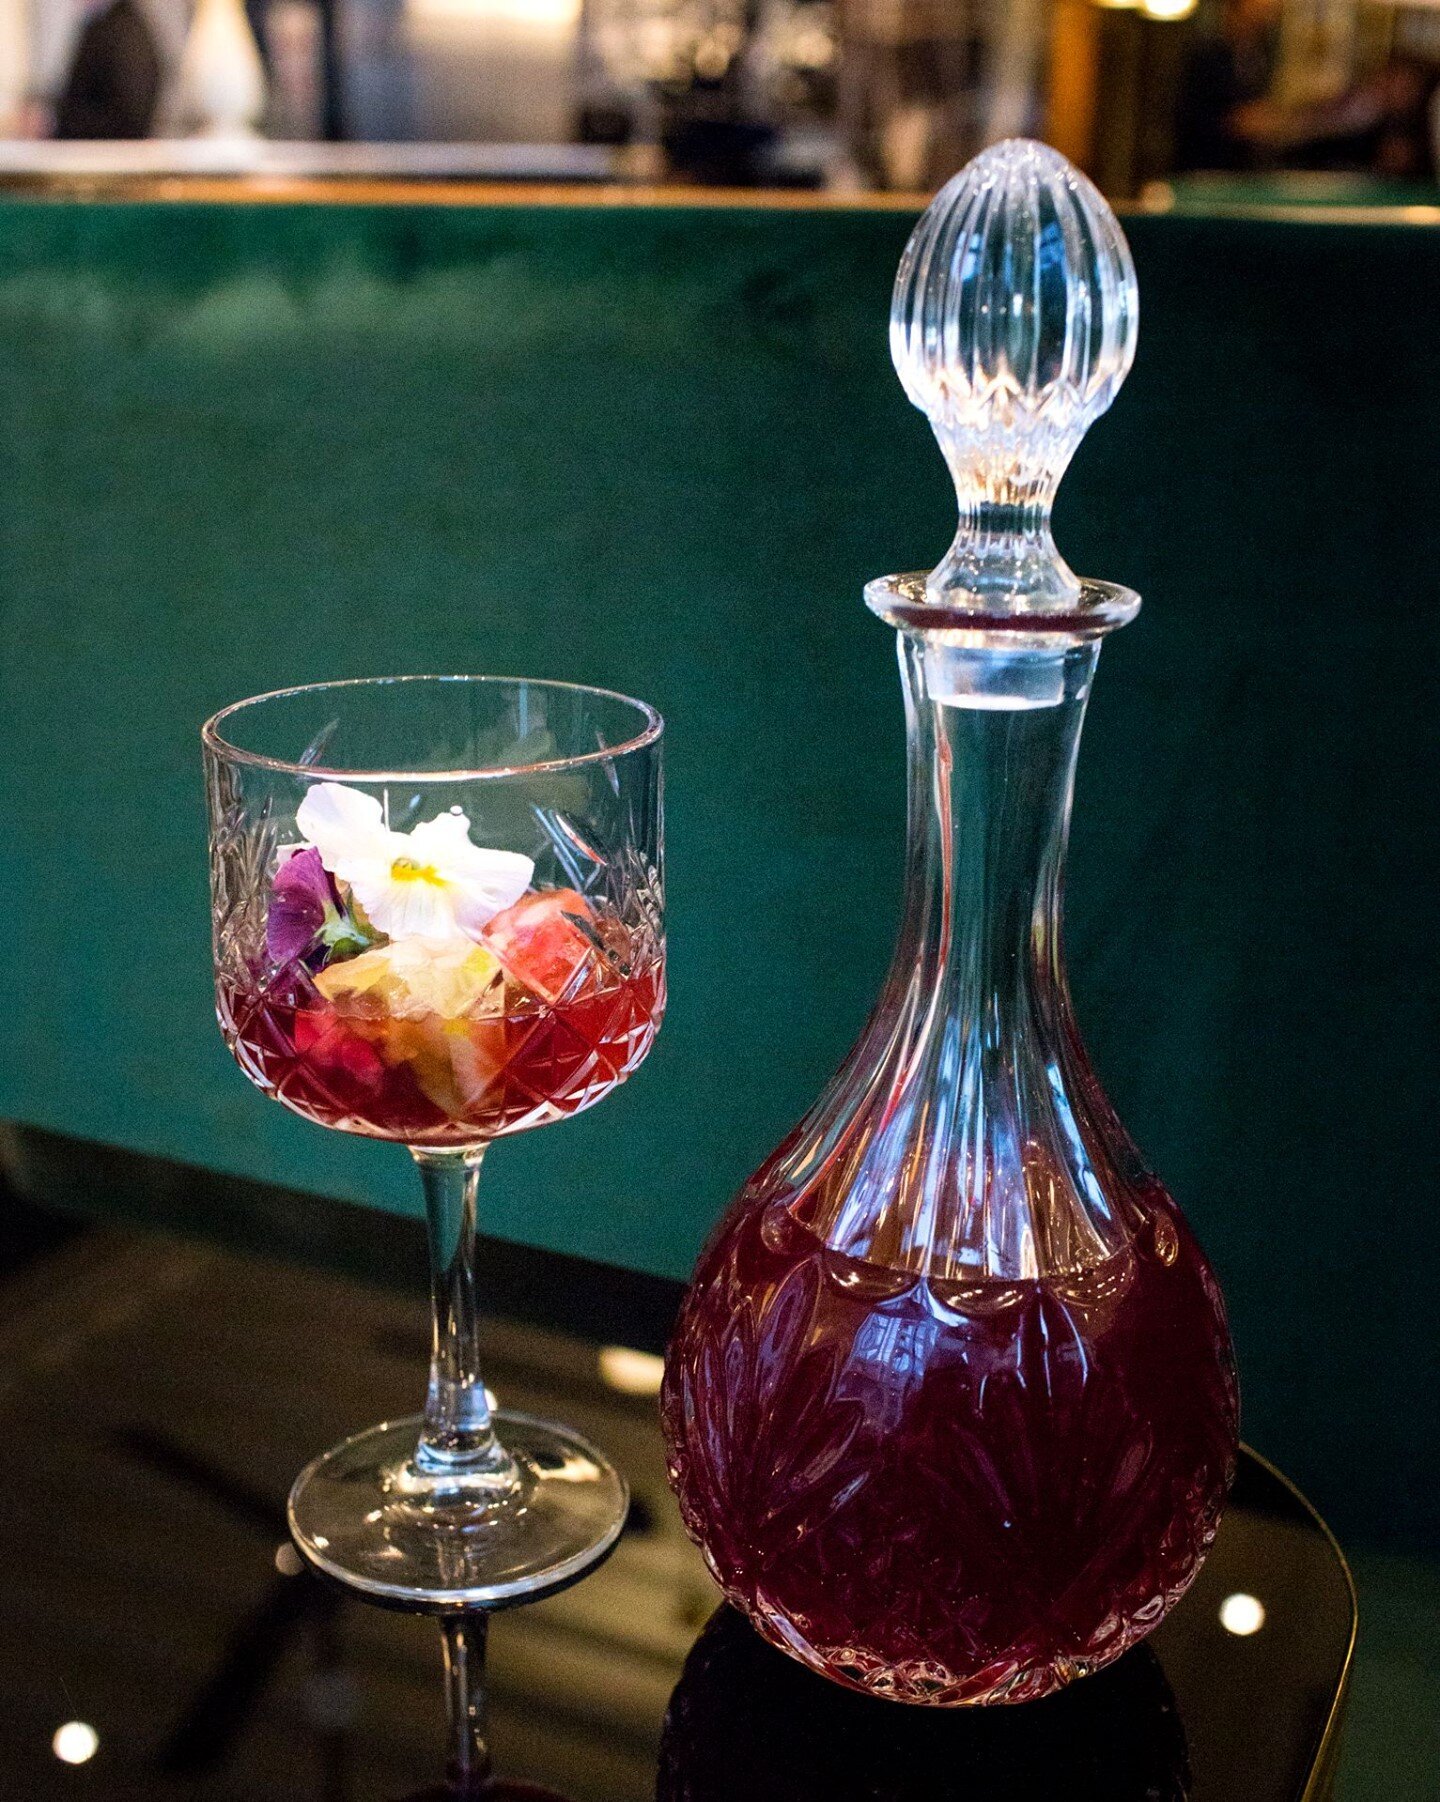 Our Sangria Roja is as refreshing as it is beautiful!